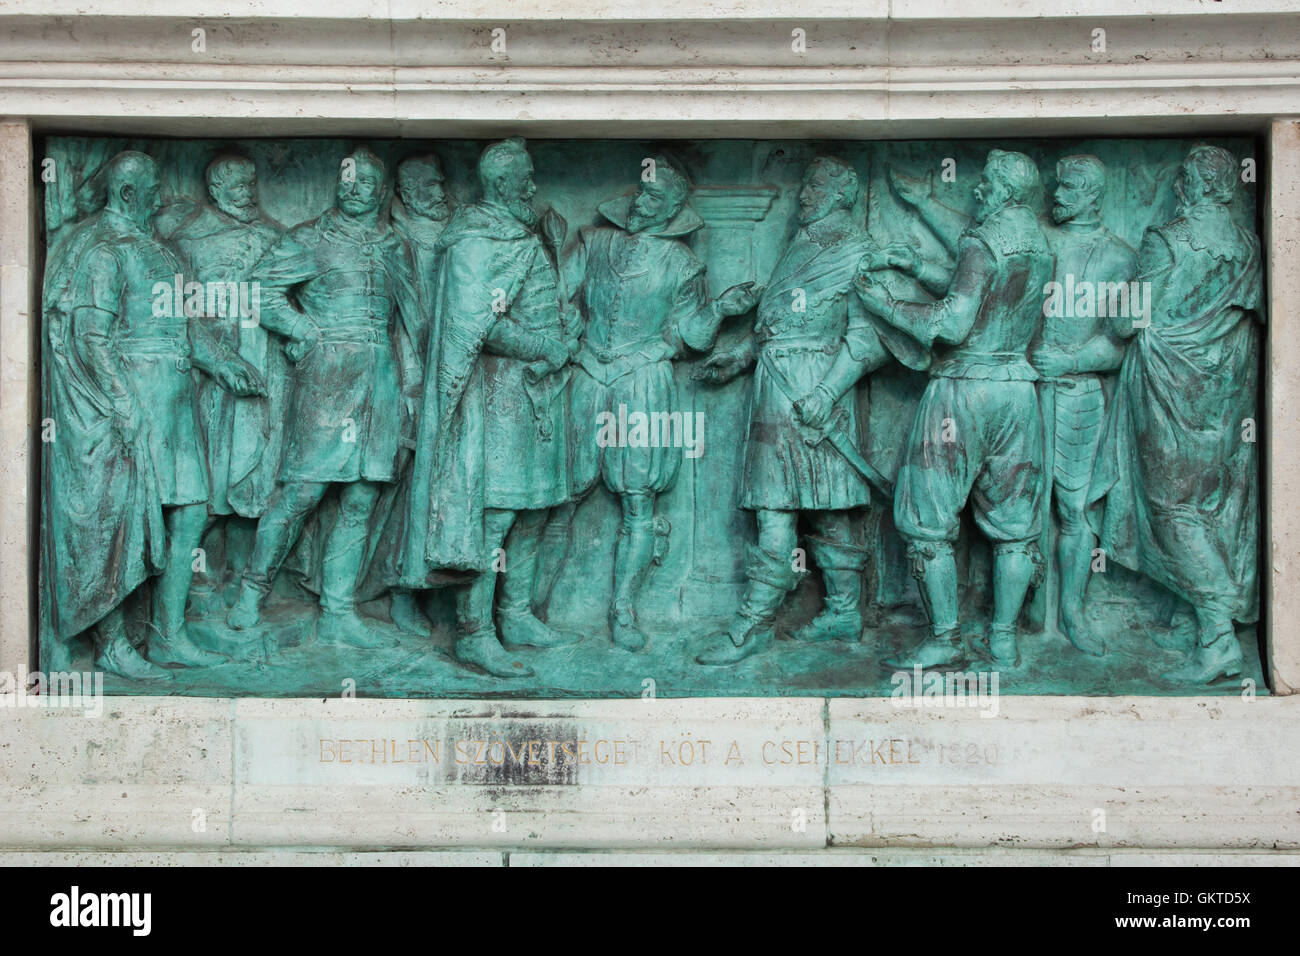 Gabriel Bethlen concludes a treaty with Bohemia in 1620. Bronze relief by Hungarian sculptor Istvan Szabo on the Millennium Monument in the Heroes Square in Budapest, Hungary. Stock Photo